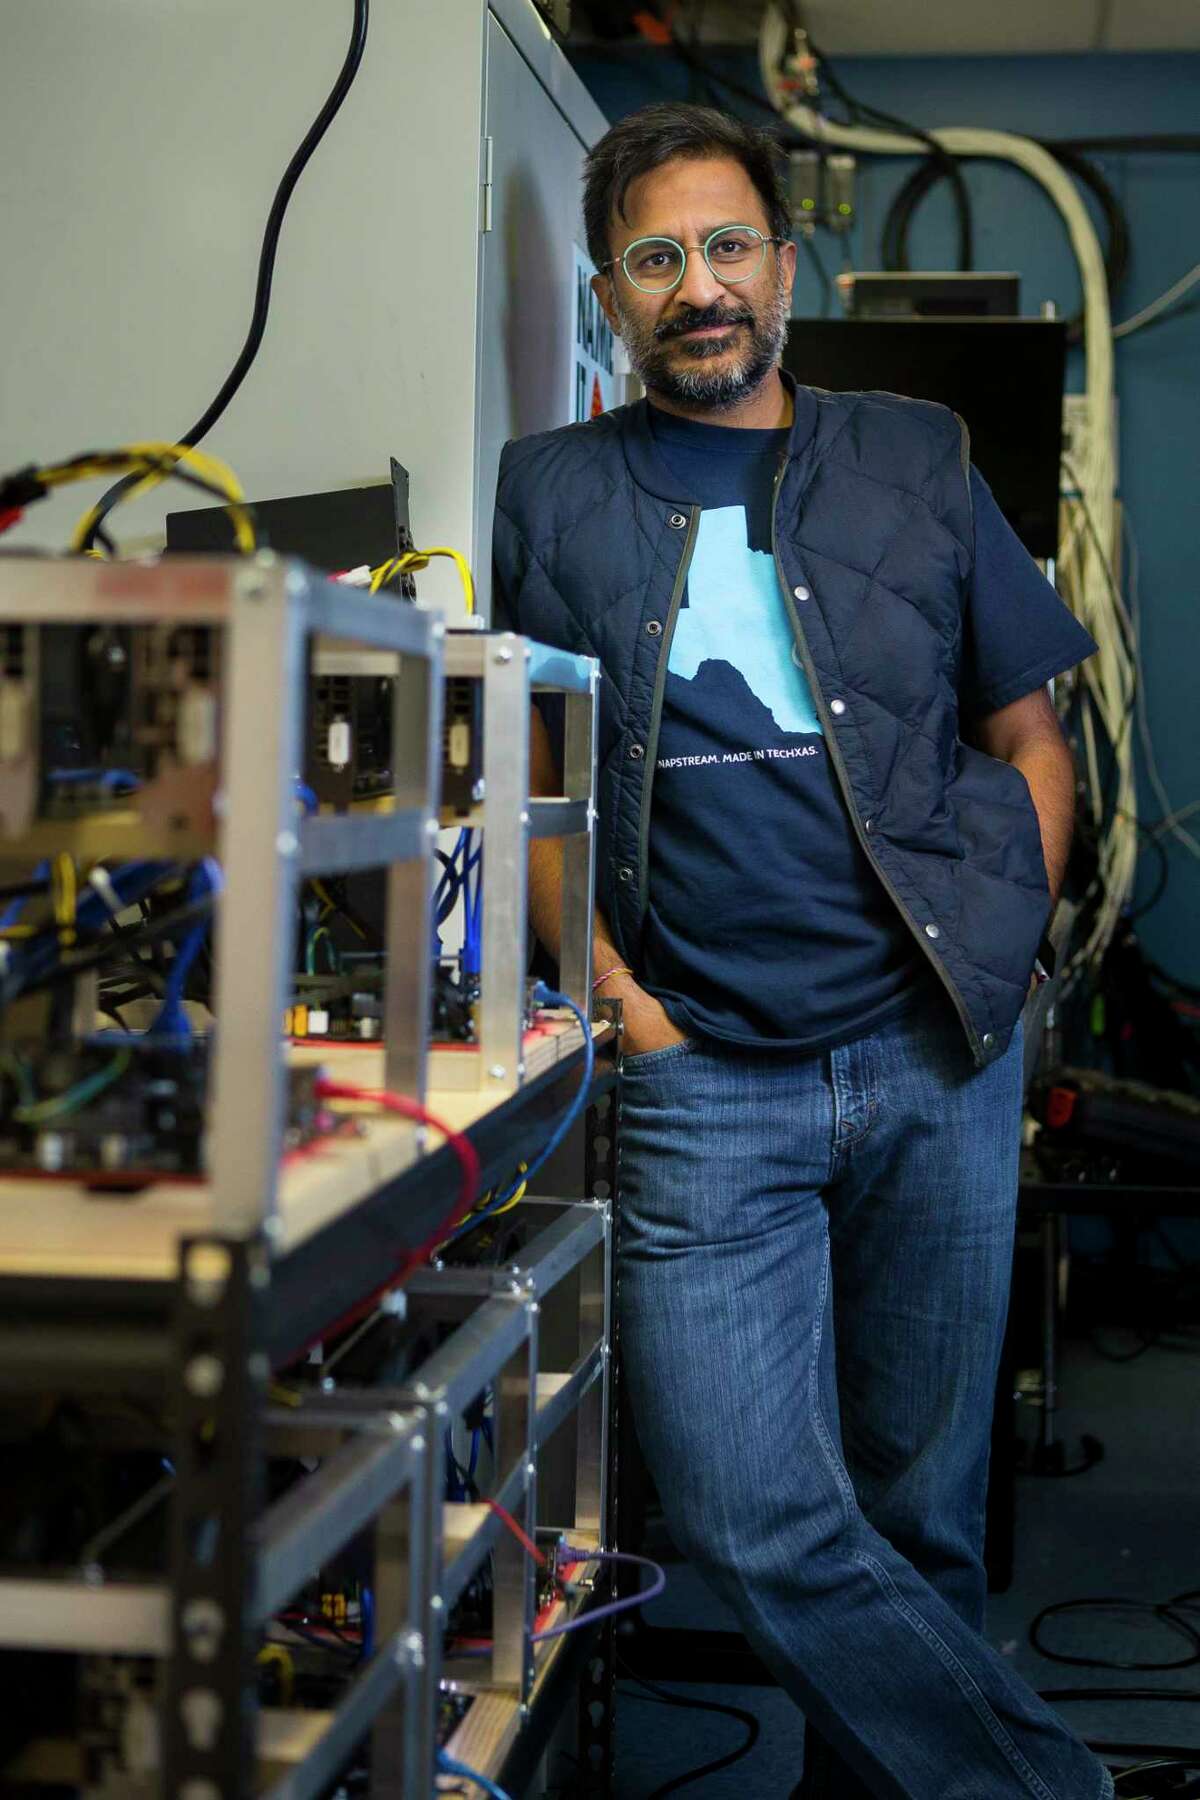 Snapstream CEO Rakesh Agrawal, Wednesday, Jan. 24, 2018, in Houston. Agrawal's company is building cryptocurrency mining rigs (left) that use high powered video cards.